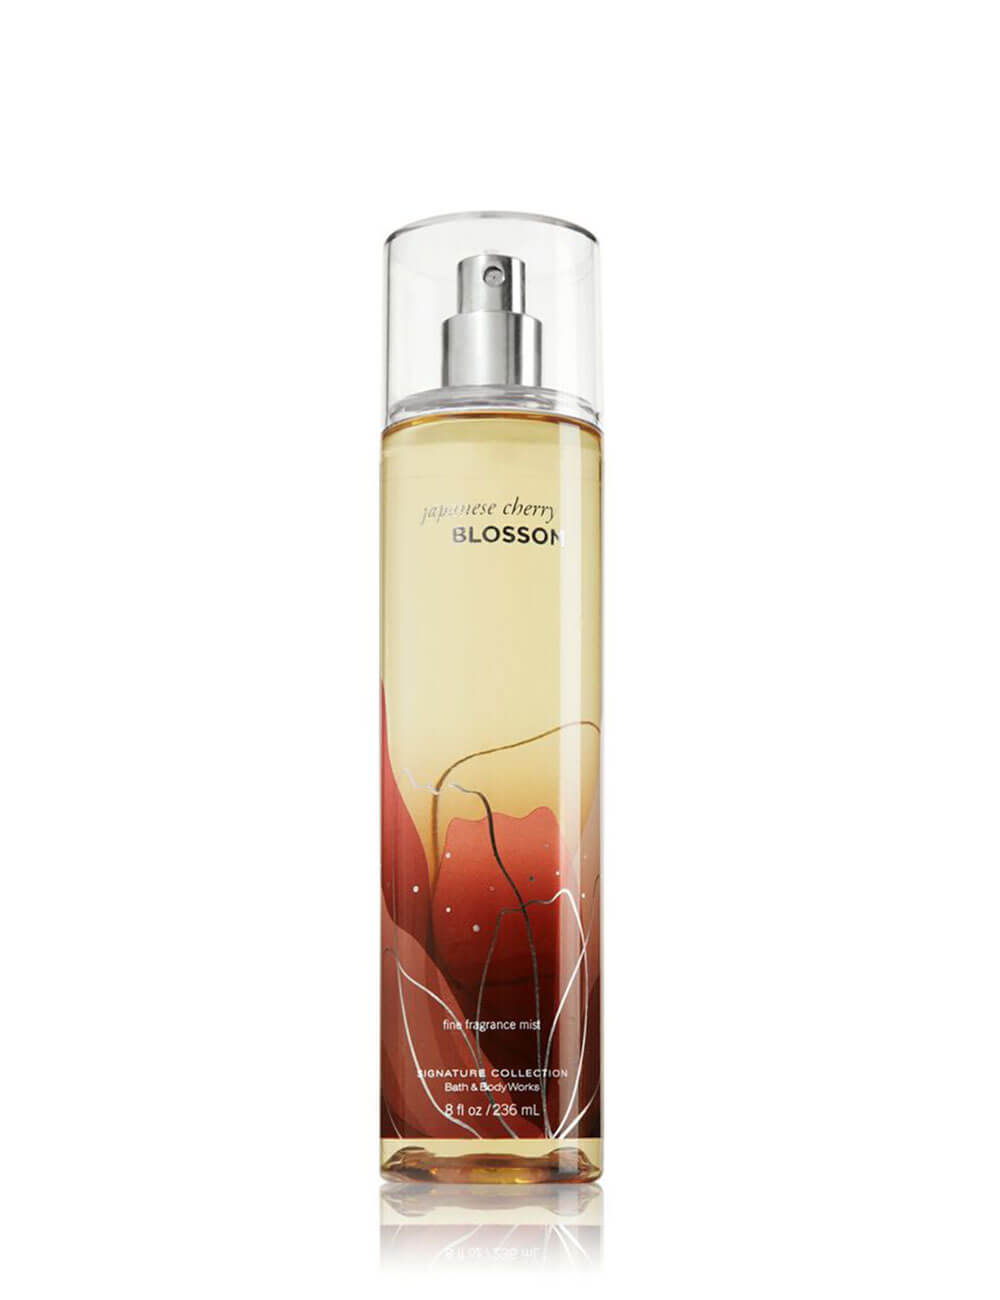 Buy original Body Luxuries Japanese Cherry Blossom Mist only at Perfume24x7.com